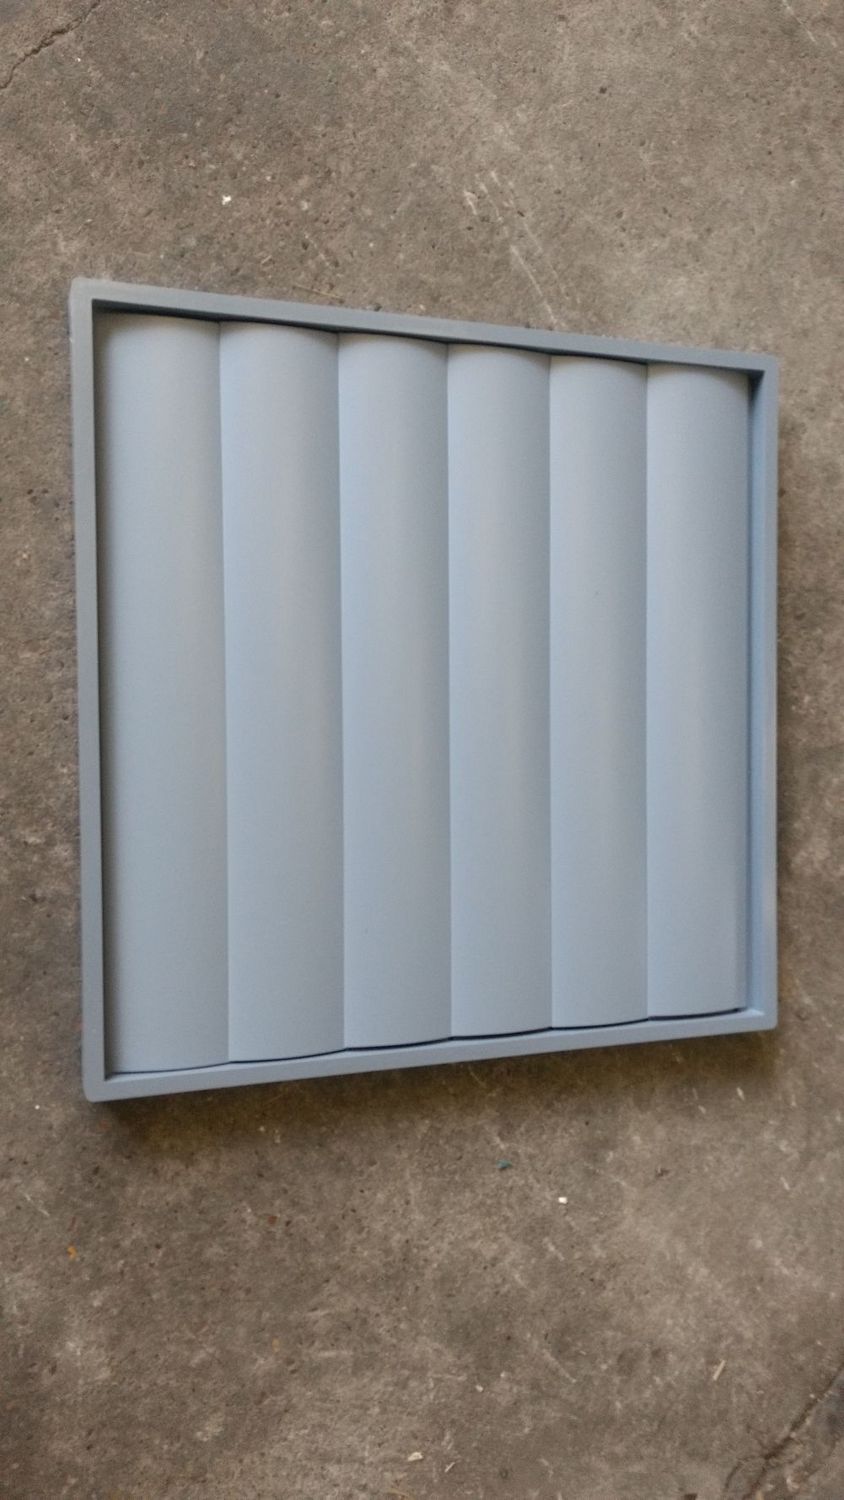 400x400mm Gravity Flap Wall Grille